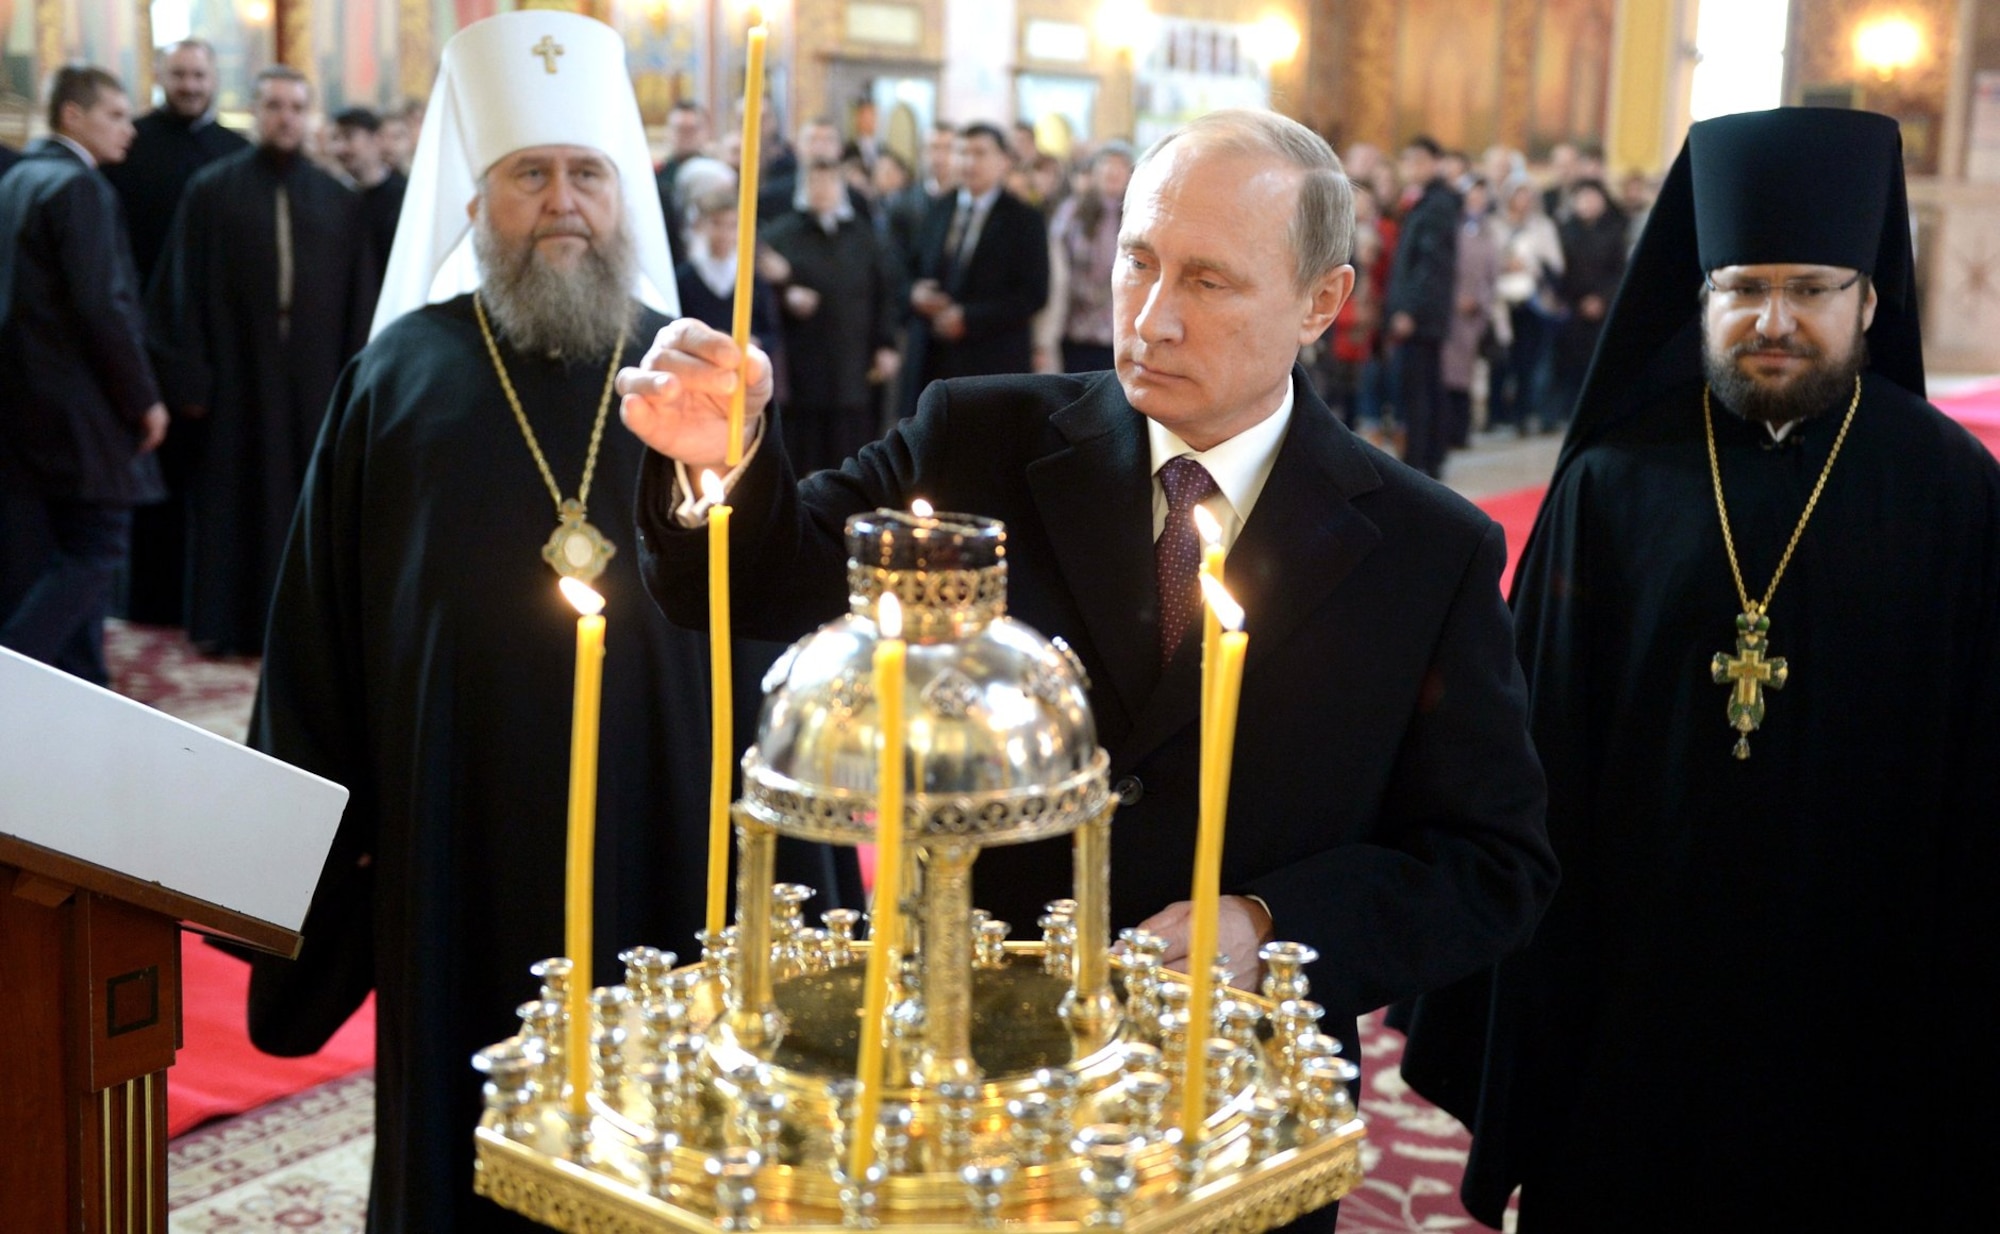 The Unexpected Theologian: The Rise of Religious Messaging in Putin's  Re-making of Russian State Identity > Air University (AU) > Wild Blue Yonder